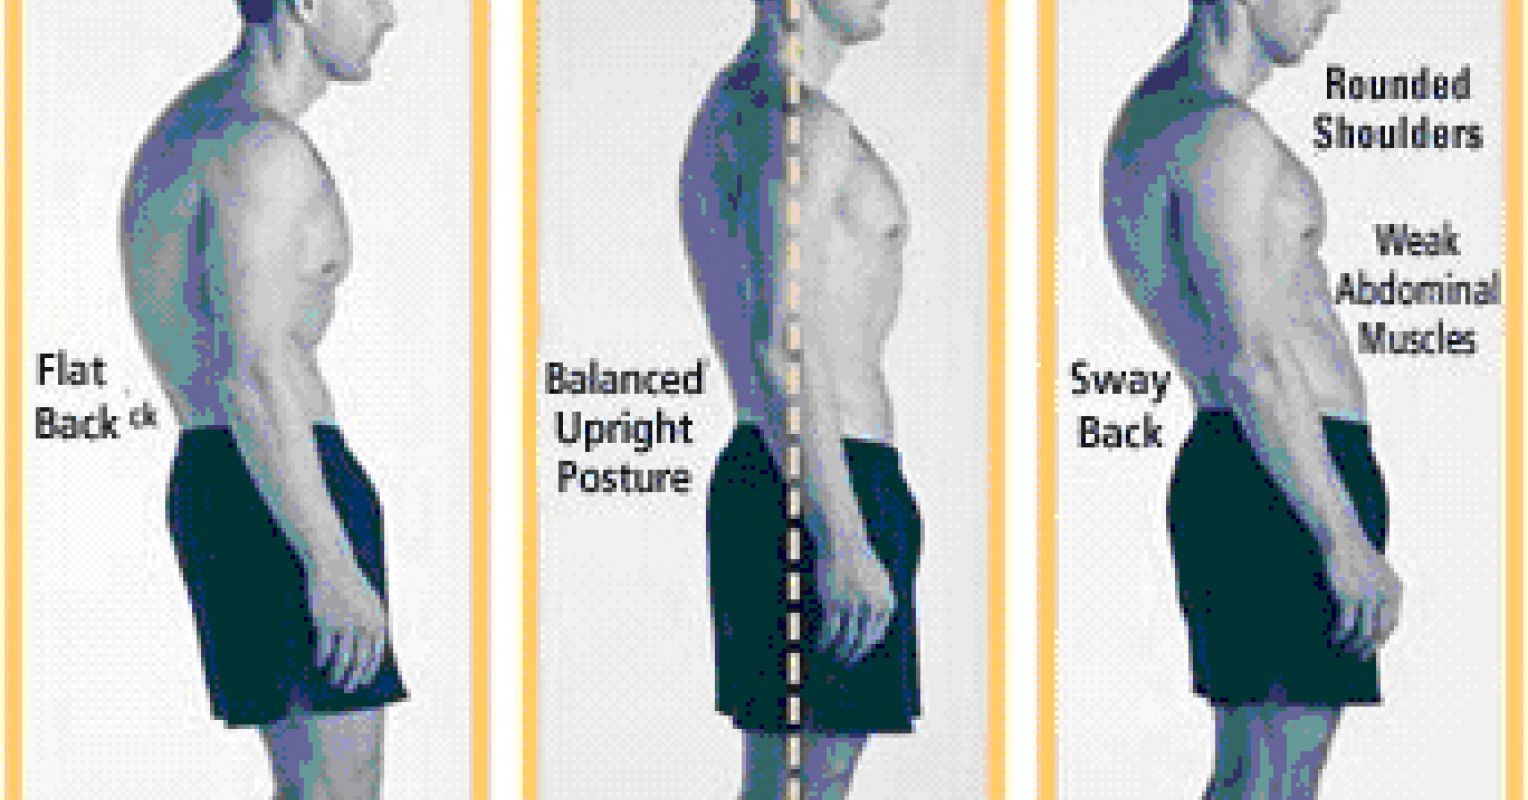 Achieving good posture an upright goal – The Denver Post